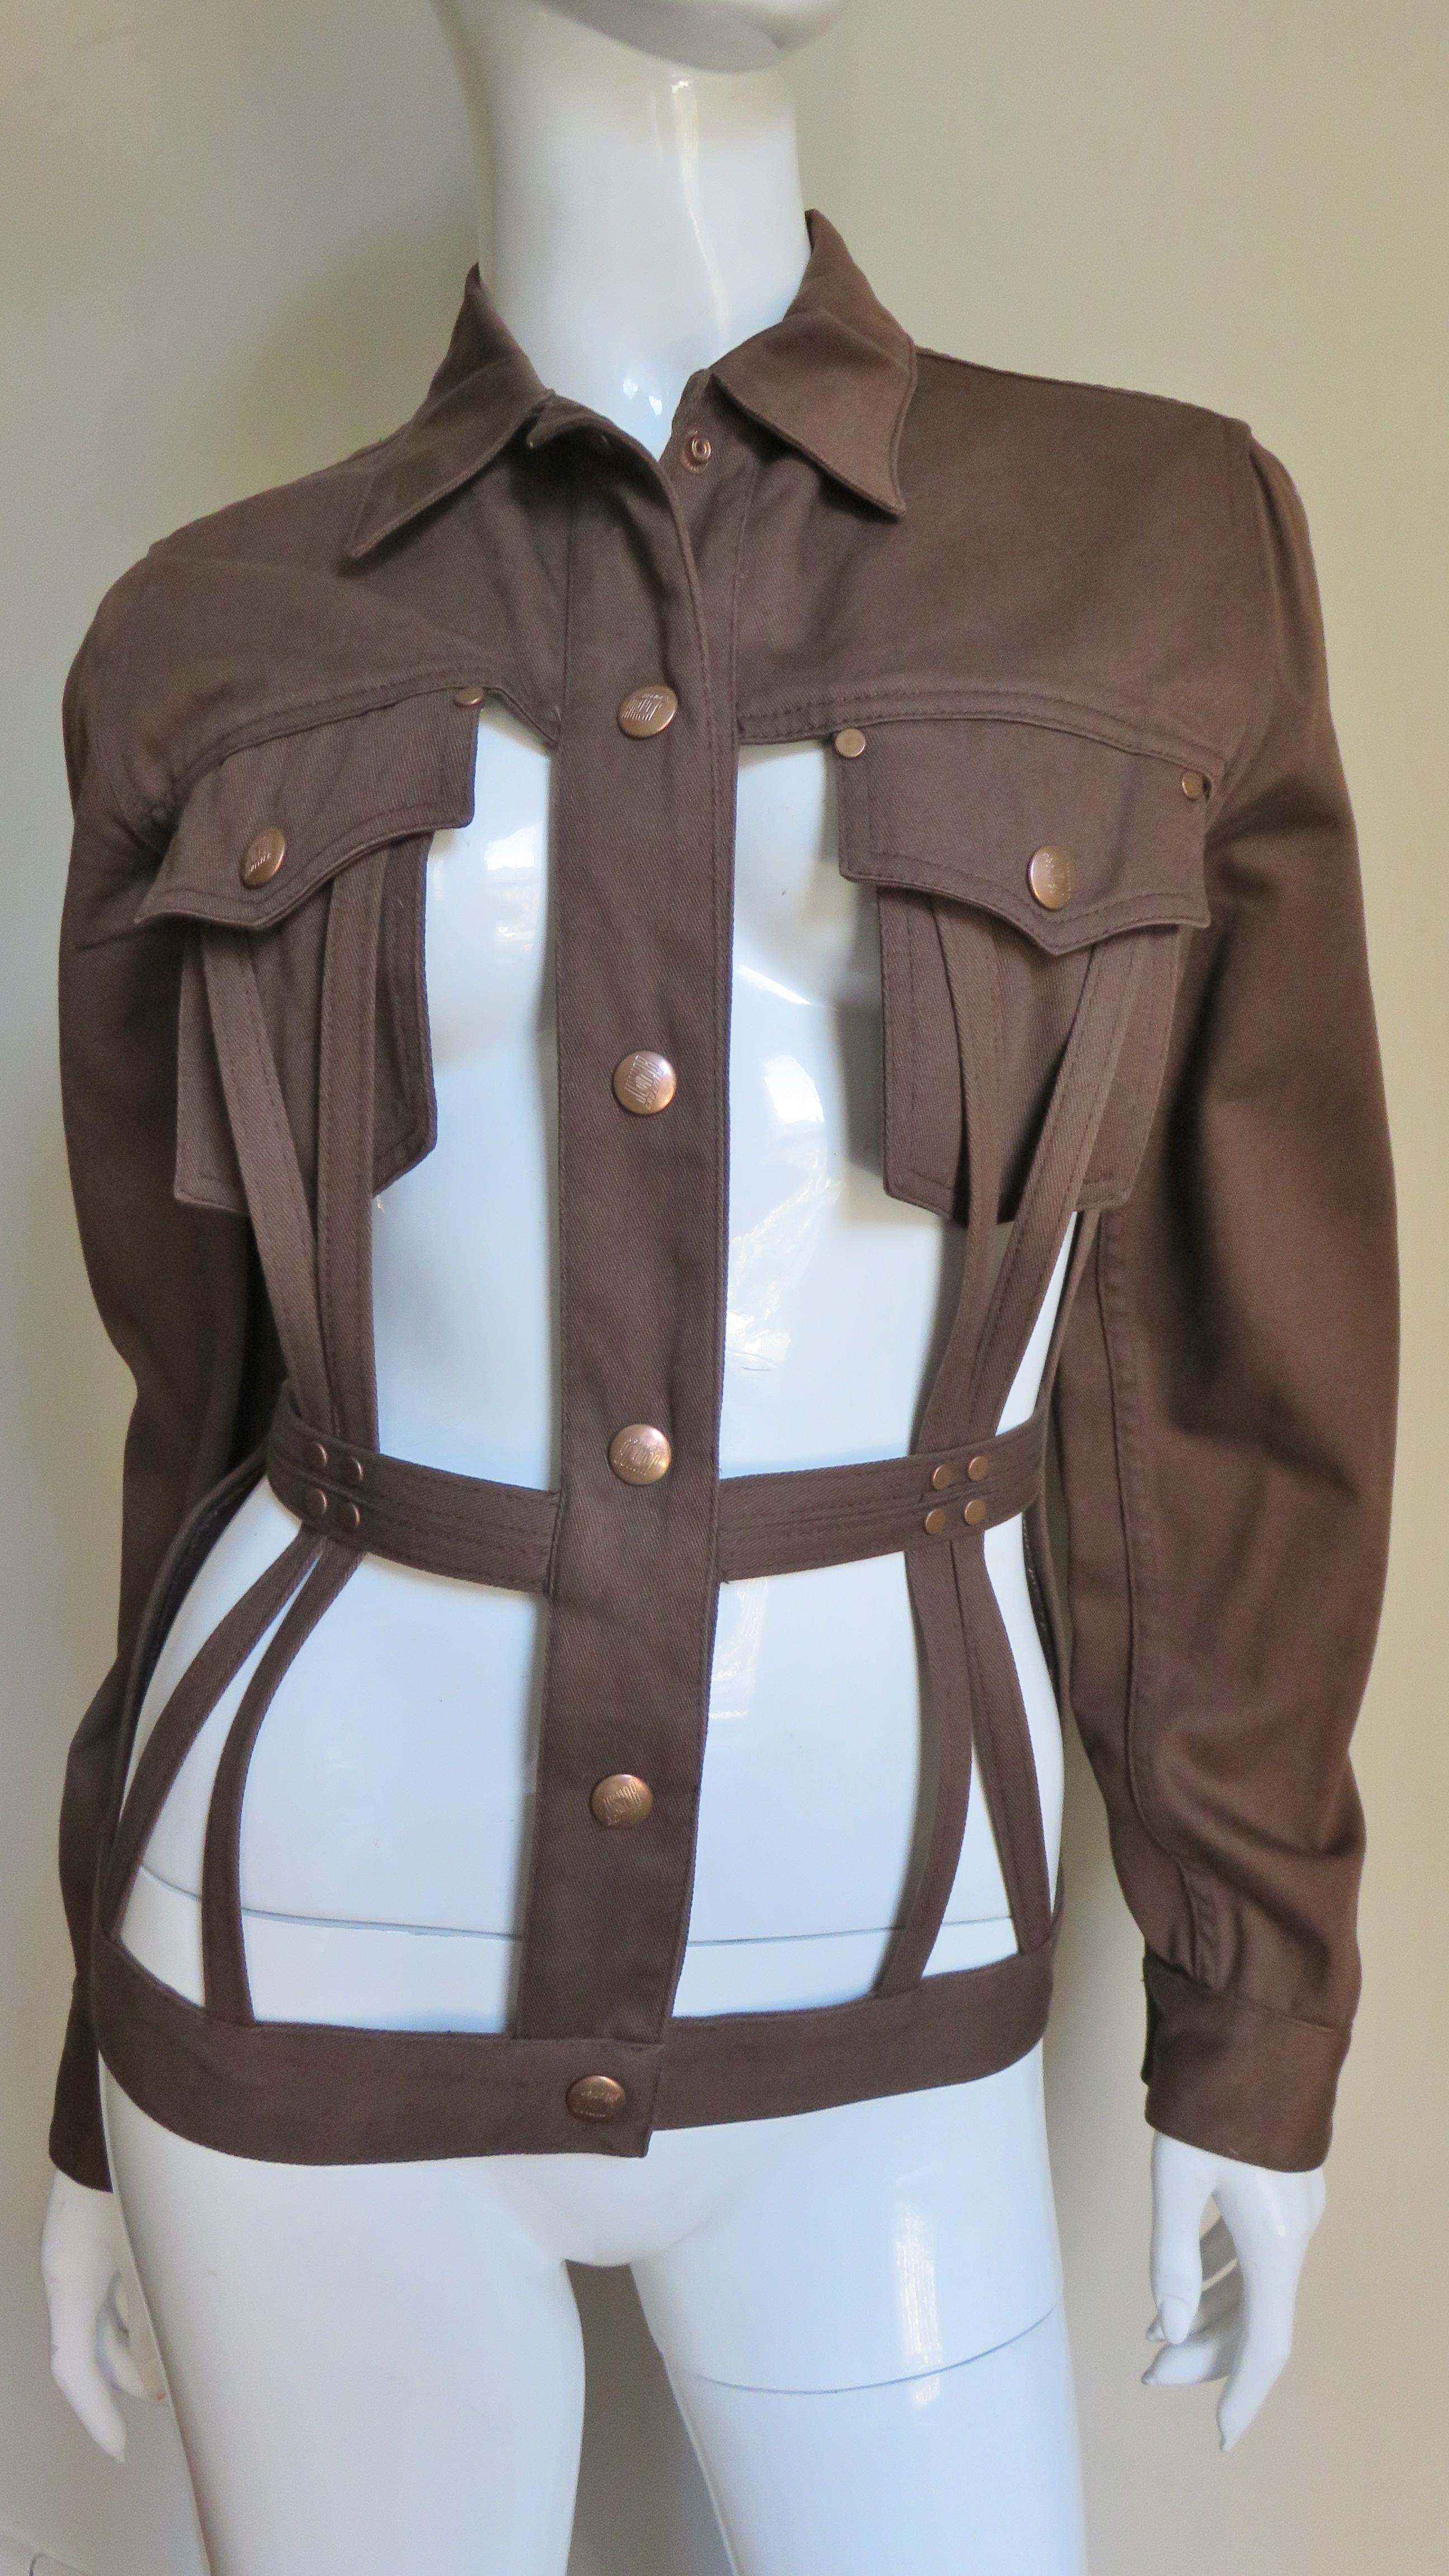 A fabulous brown cotton denim jacket from Jean Paul Gaultier's Junior Gaultier line.  It is a take on the jean jacket with the expected long sleeves, collar, yoke and copper metal snaps closing the front, cuffs and breast pockets. The difference is